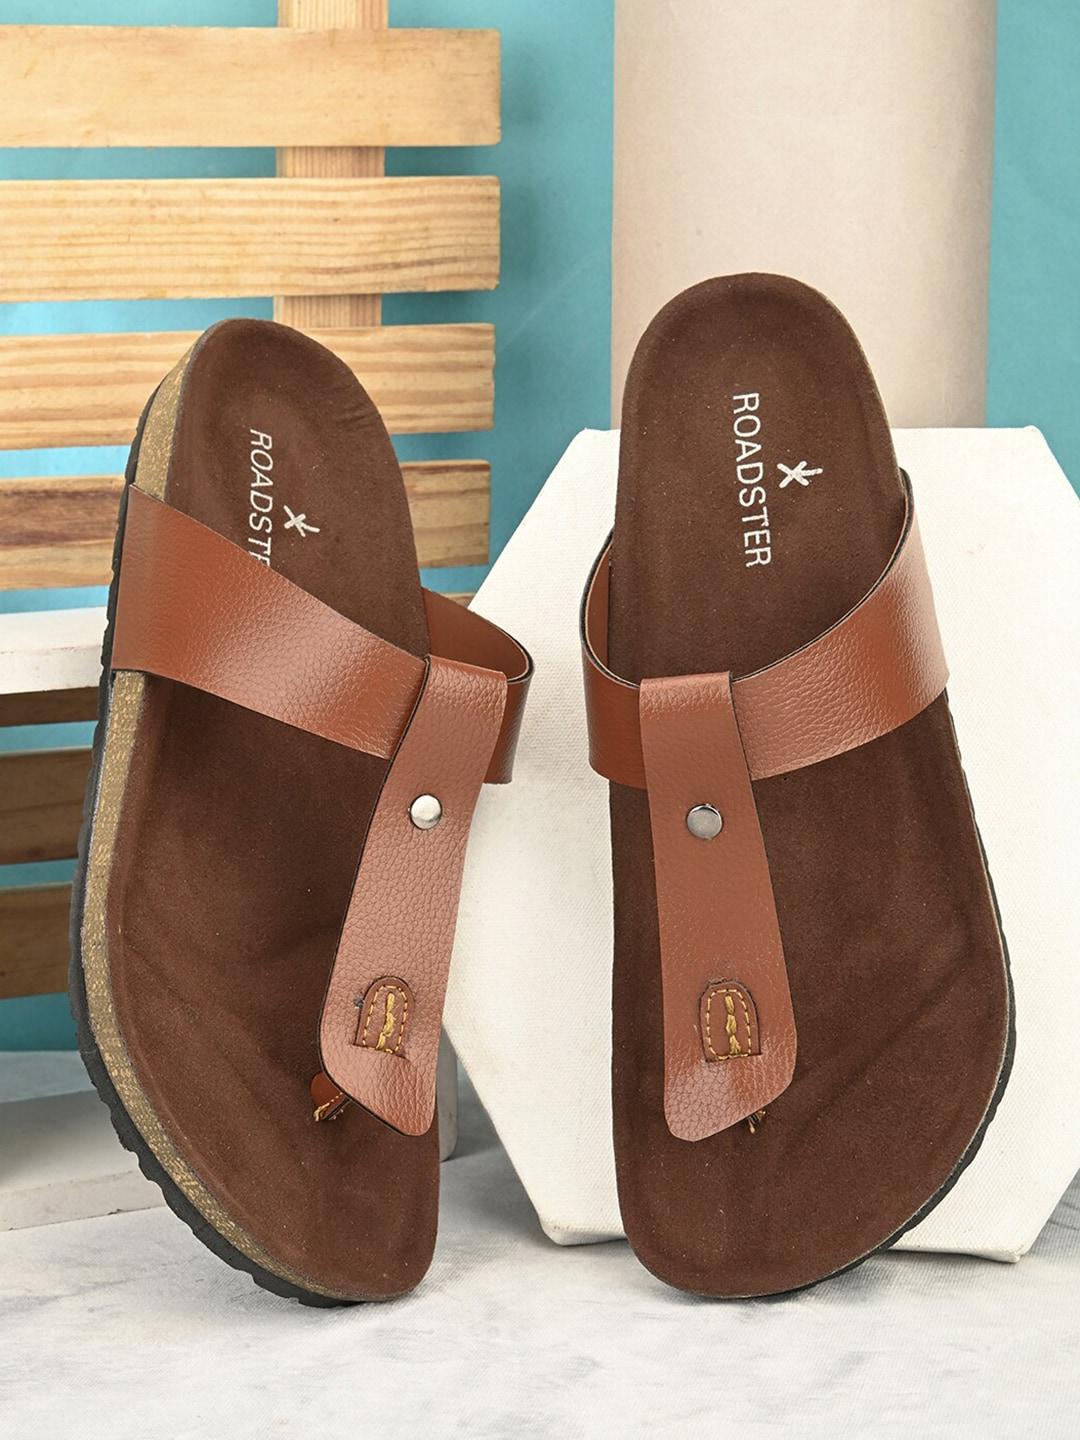 the-roadster-lifestyle-co.-tan-slip-on-comfort-sandals